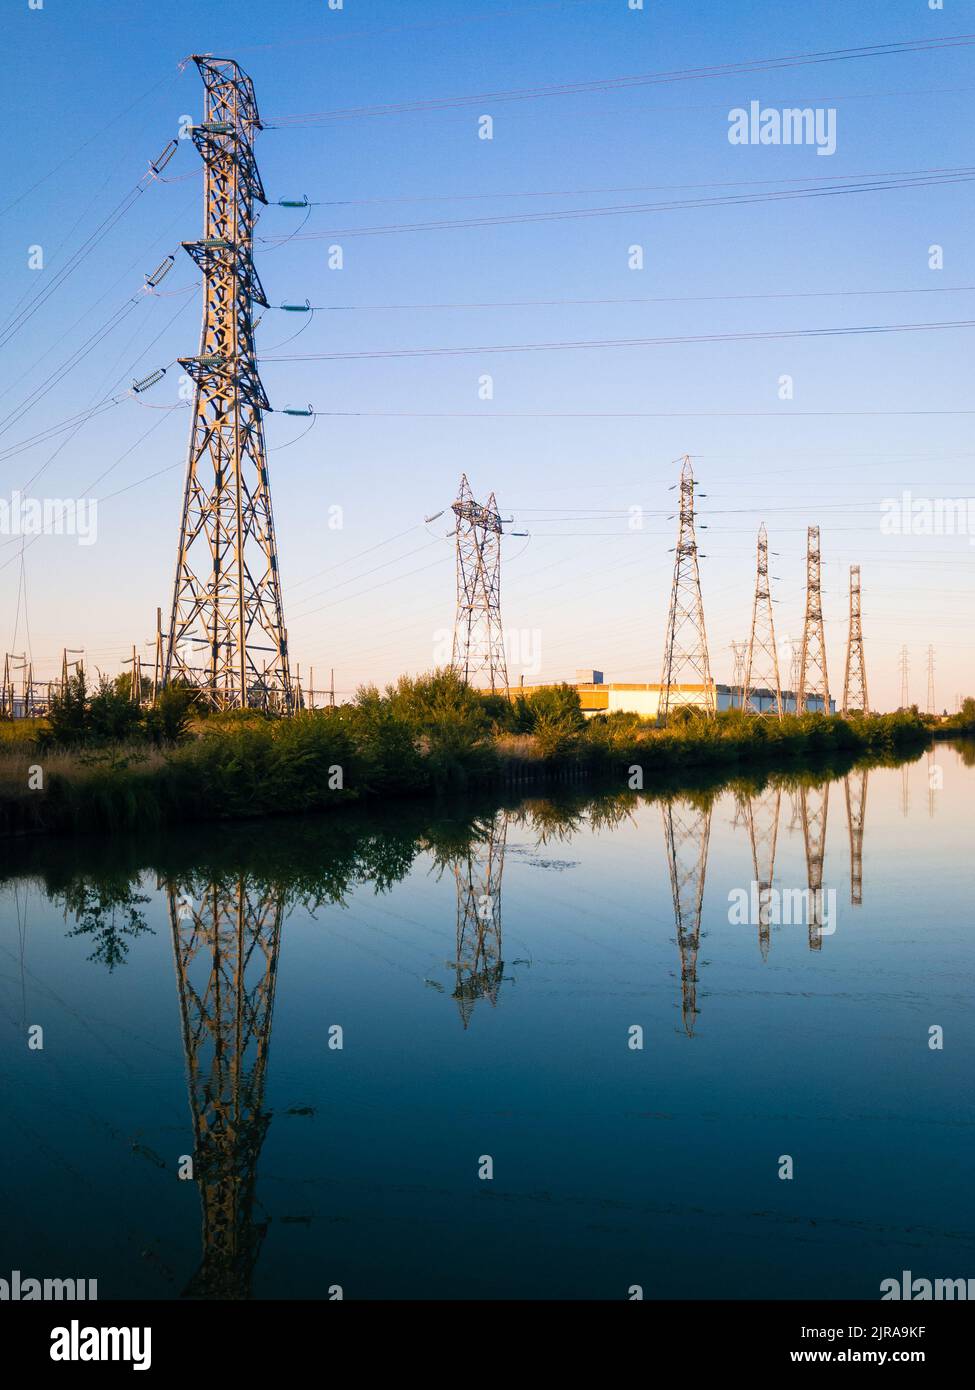 A row of metallic transmission towers of various shapes reflecting in the still water of a canal against blue sky at dusk. Stock Photo